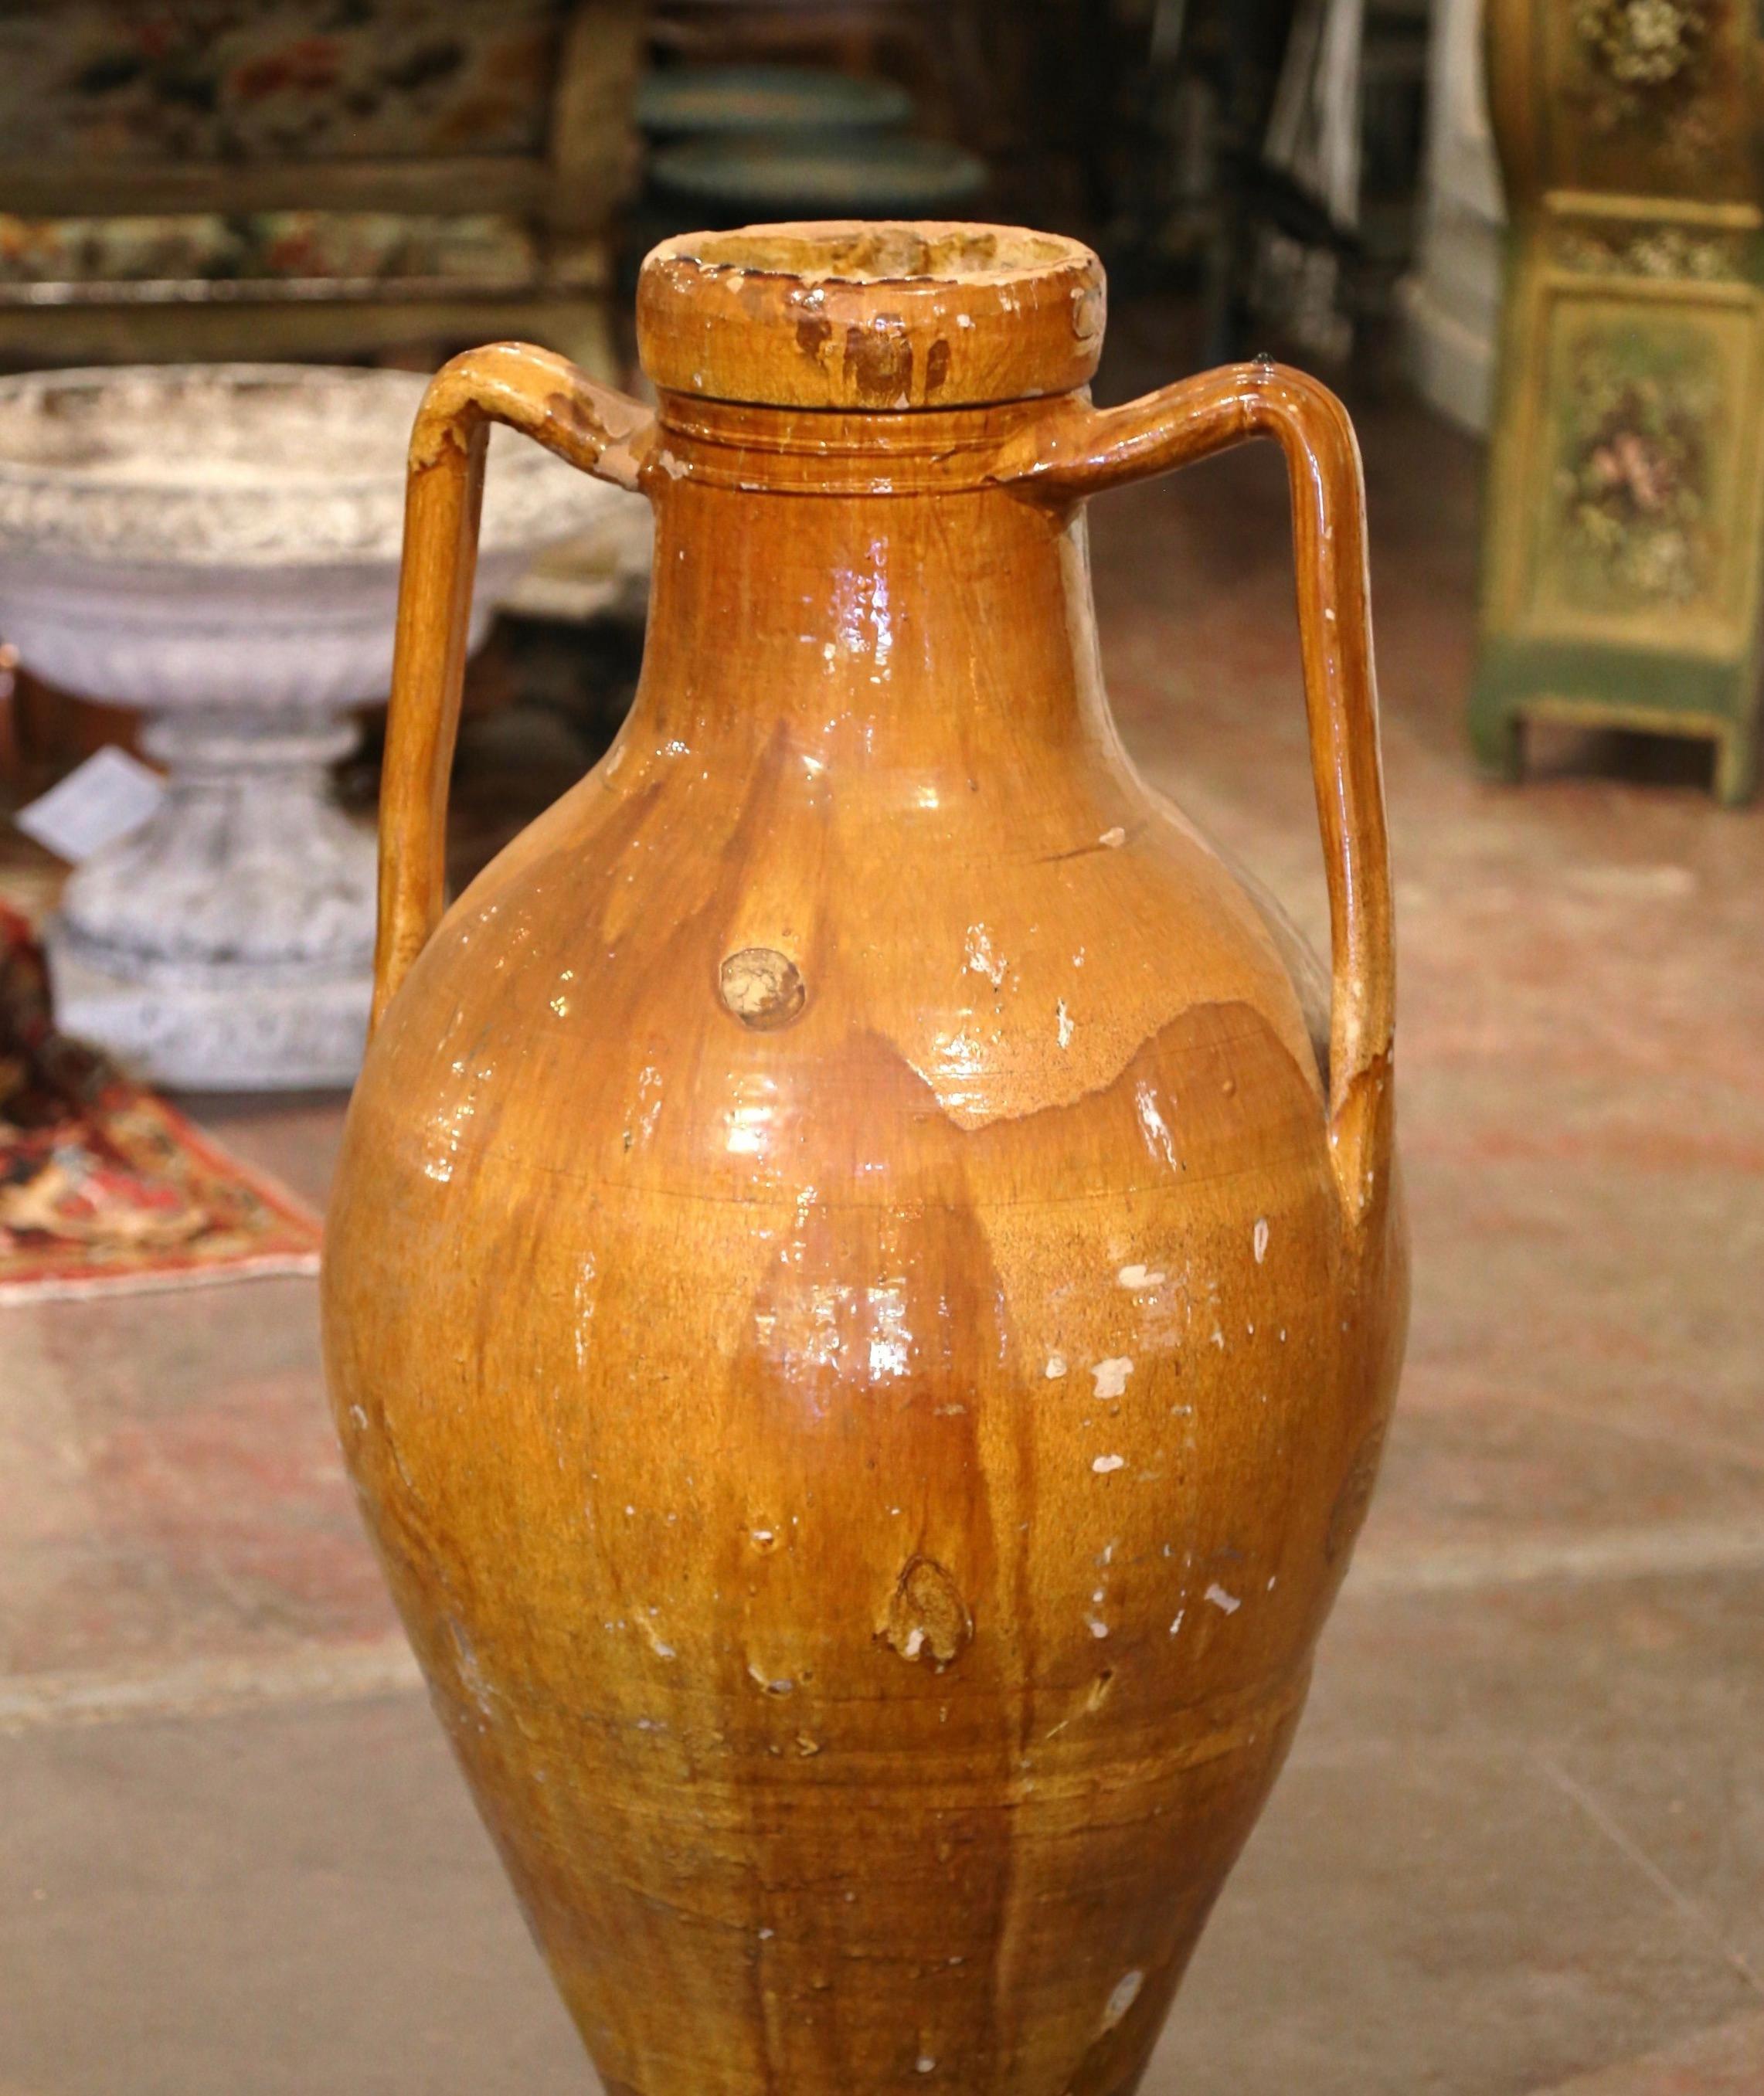 Add a Mediterranean touch to your indoor or outdoor spaces with this elegant antique terracotta Amphora. Crafted in Provence, southern France circa 1860, and built of earthenware, the large urn has a traditional round shape over a long neck; it is